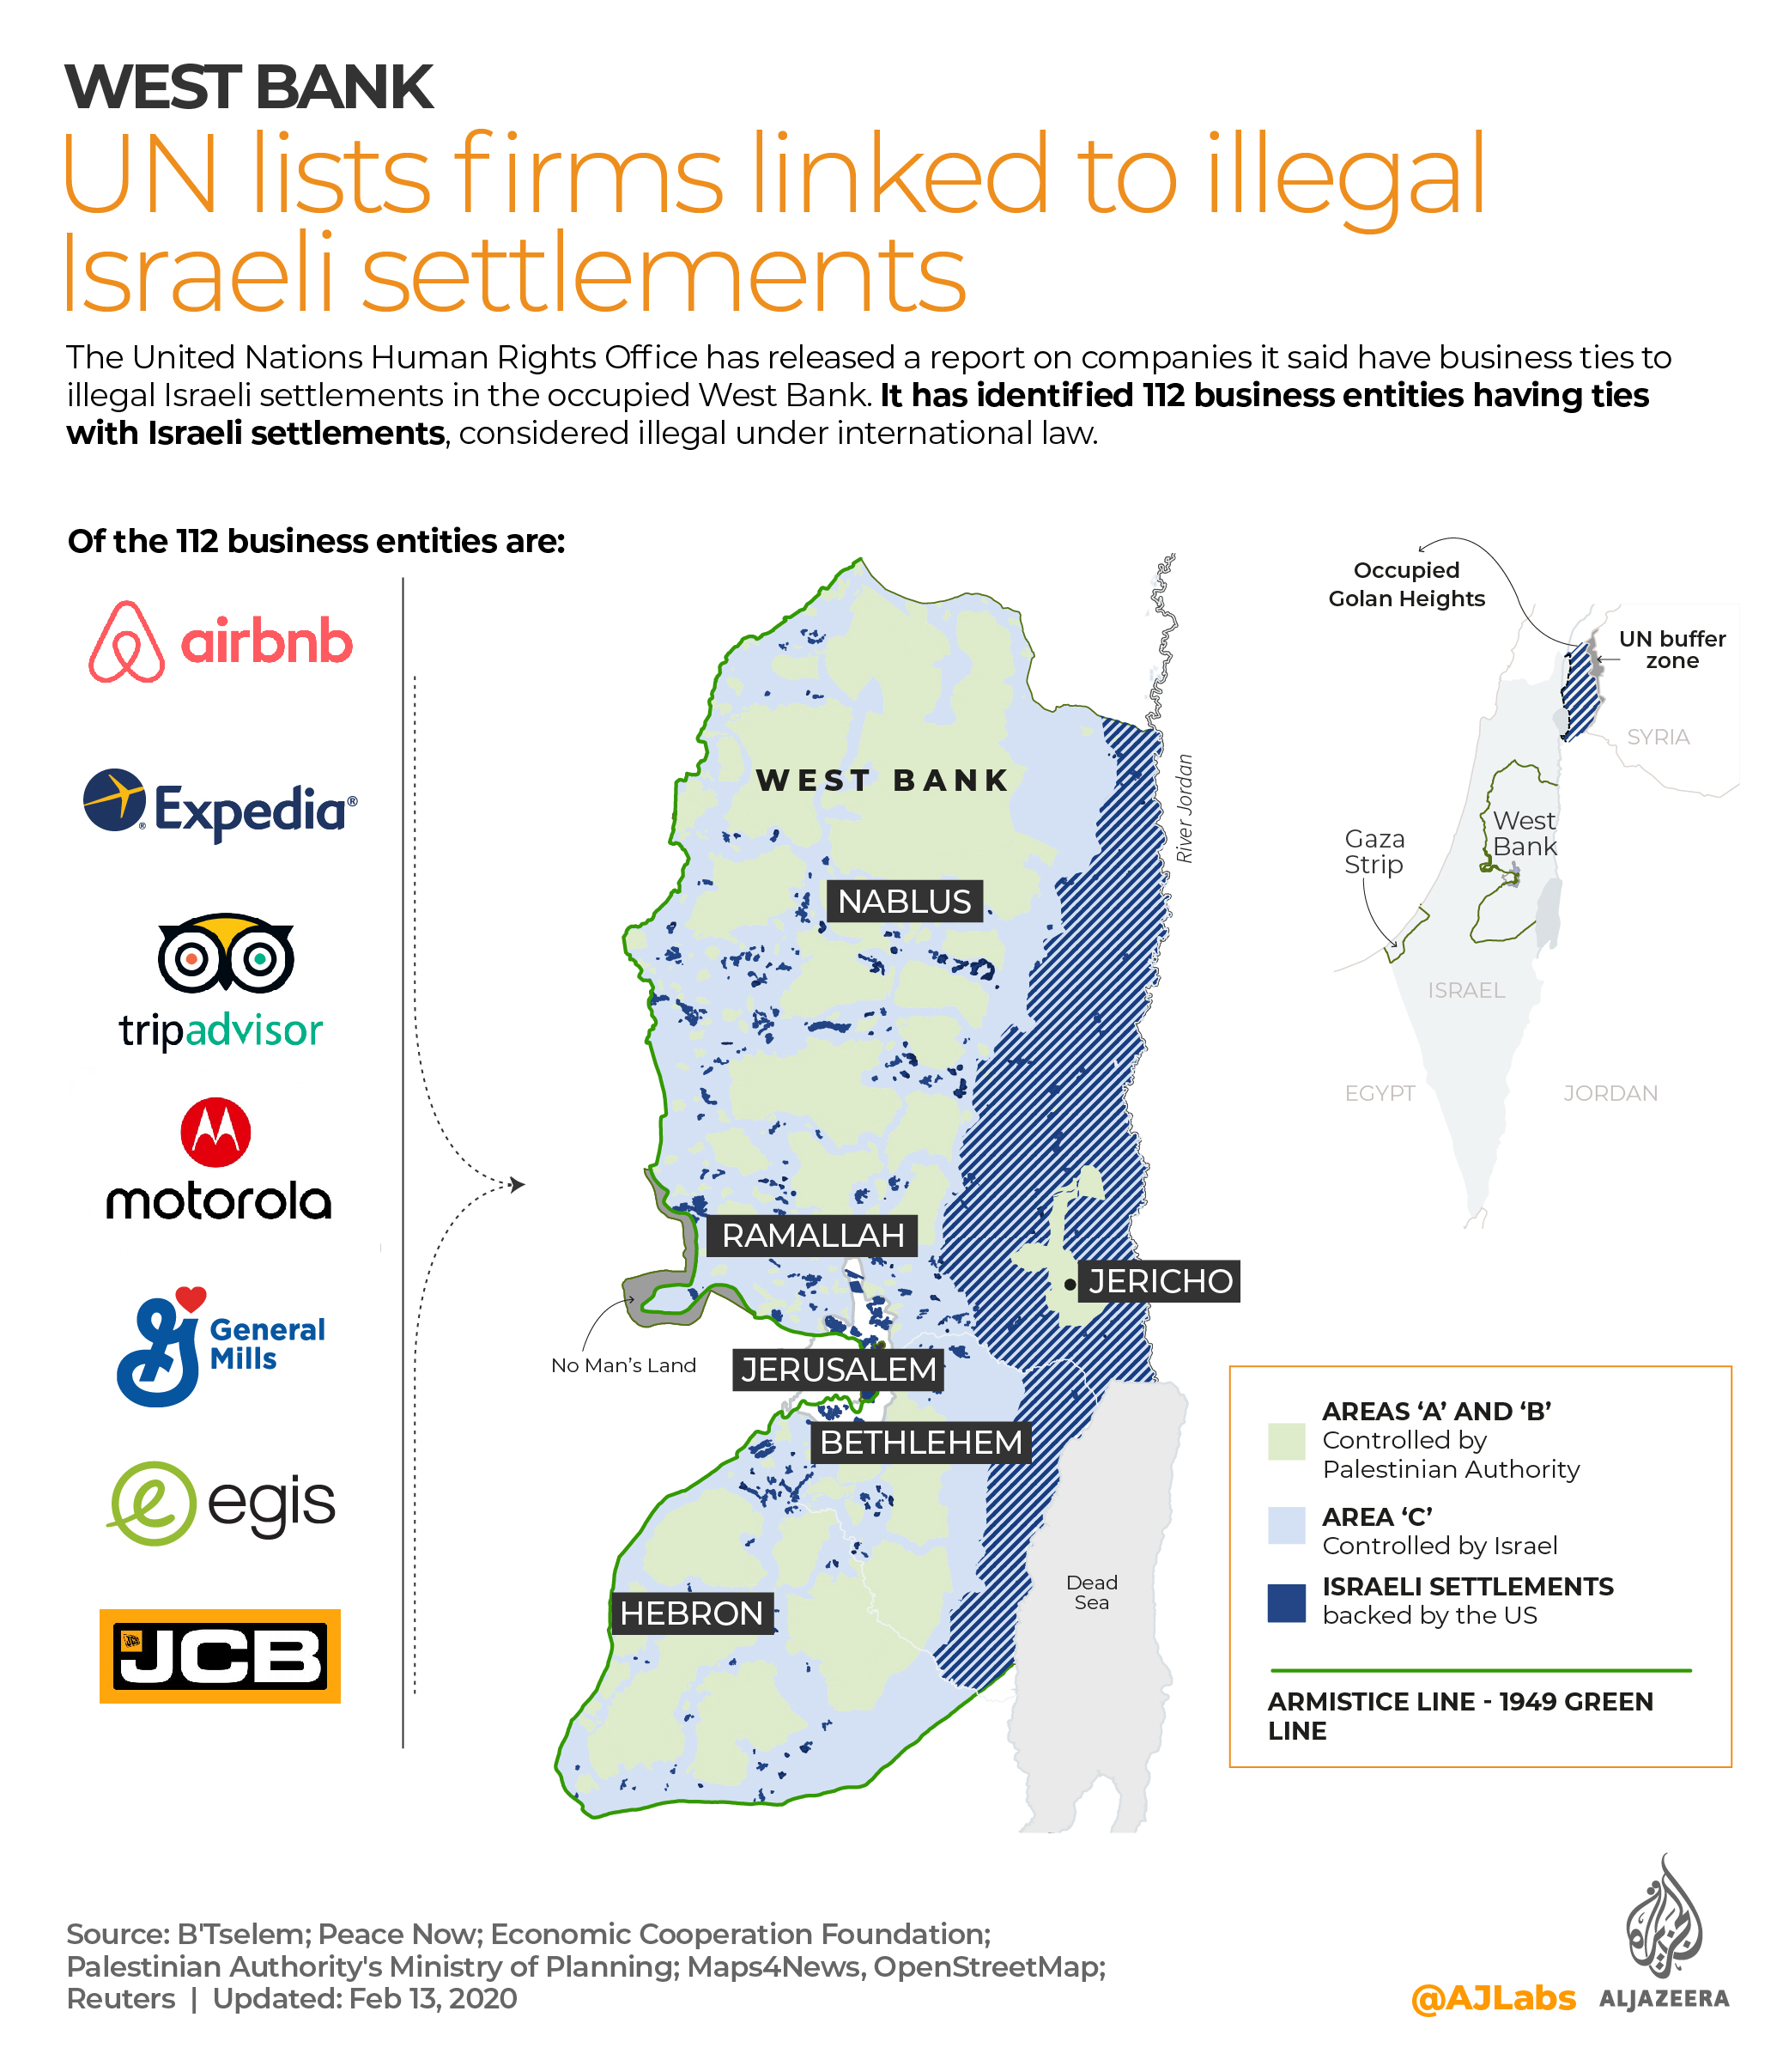 INTERACTIVE: Palestine/West Bank Illegal settlements - 112 companies